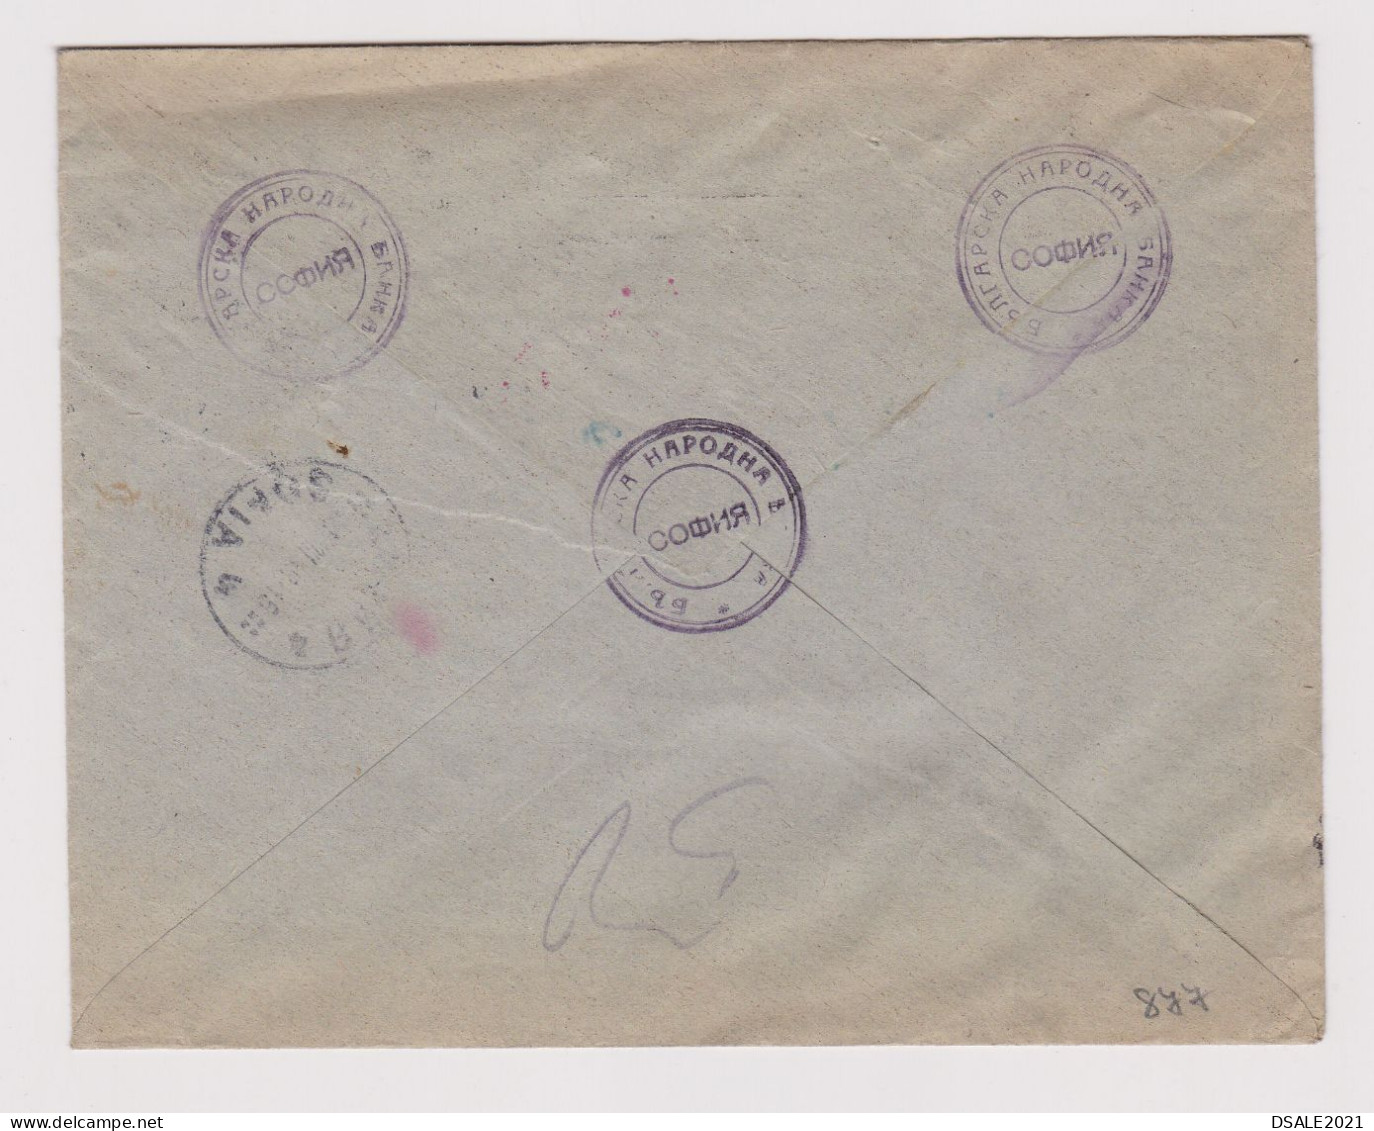 Bulgaria Bulgarien 1940s Registered Bank Cover With Perfin, Topic Stamps, Domestic Used Rare (877) - Storia Postale